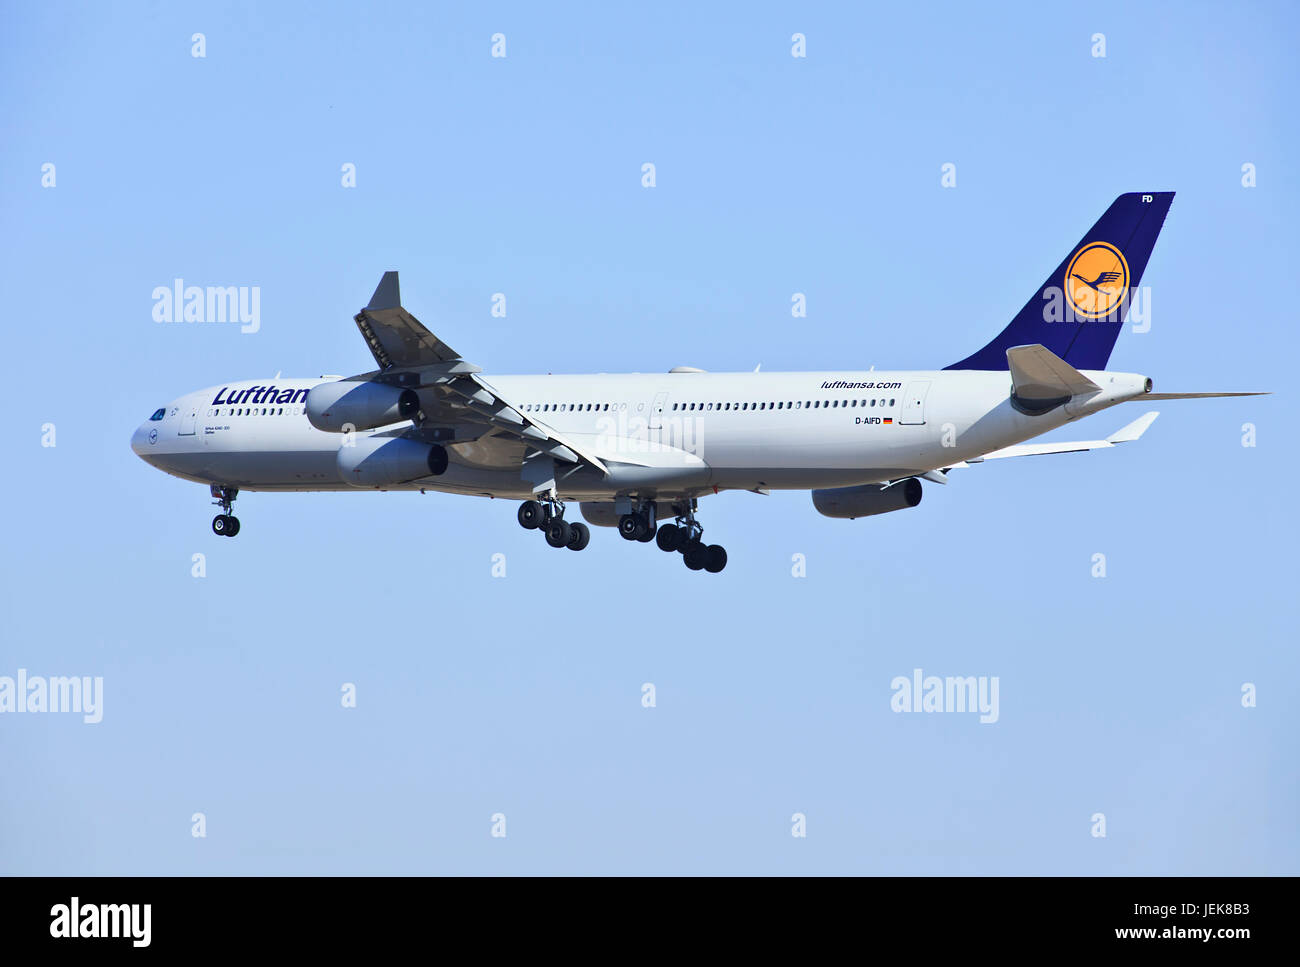 BEIJING-DEC. 9. Lufthansa Airbus A340-313X, D-AIFD landing. Airbus A340 is a long-range four-engine wide-body commercial passenger jet airliner. Stock Photo